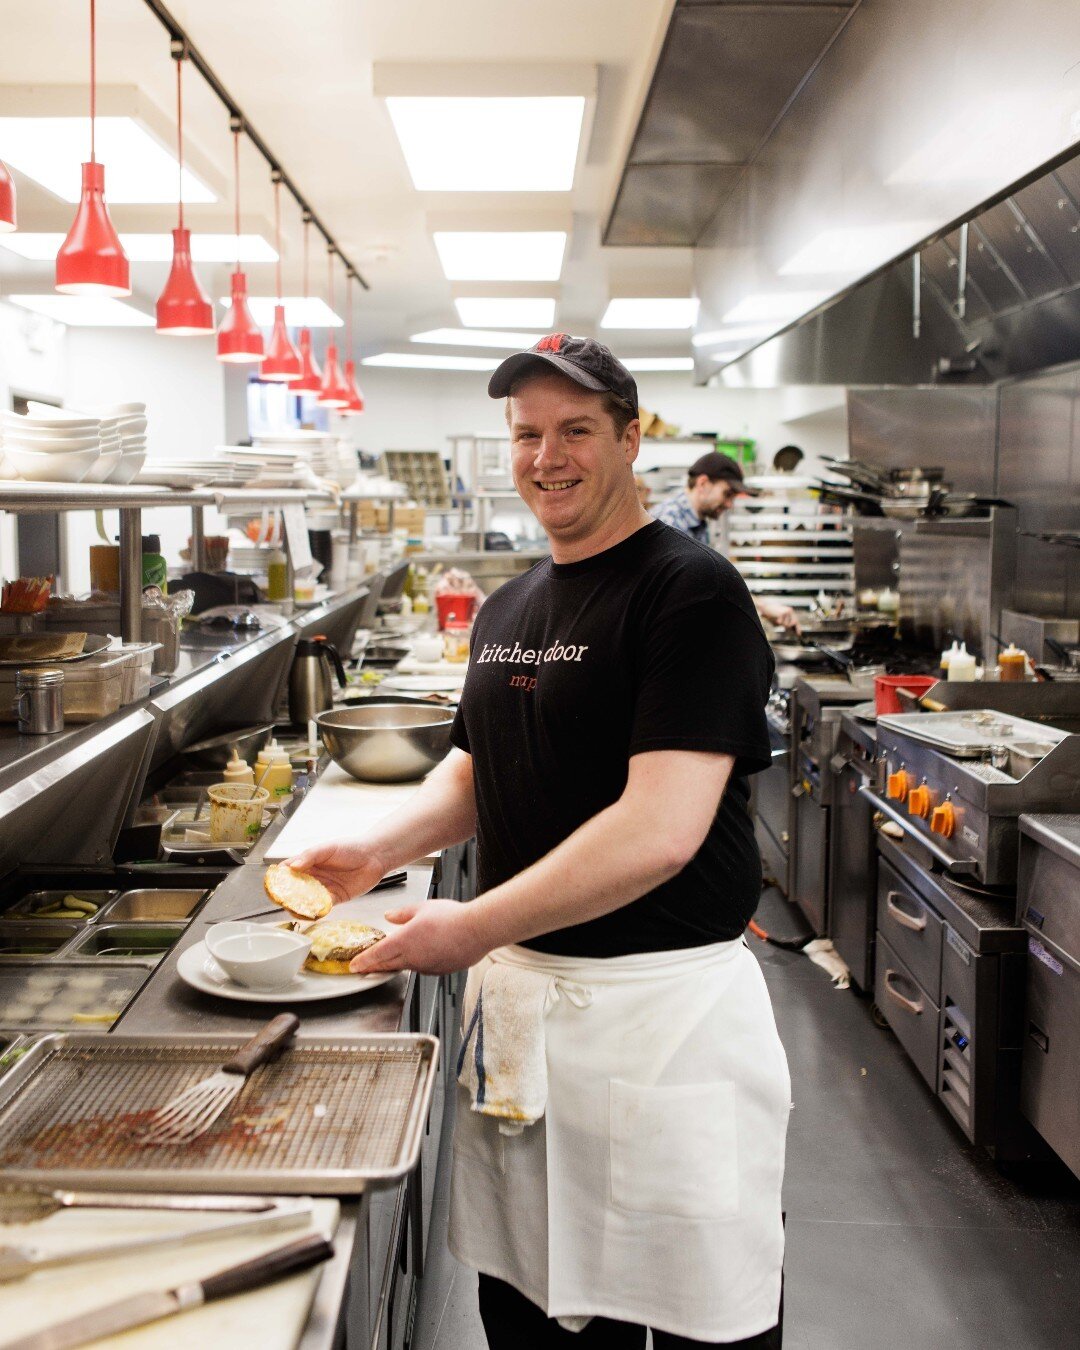 Meet Jason, a seasoned Kitchen Door chef who has been with us for ten years. Originally from New York, he has a deep appreciation for American cuisine, which he attributes to watching his dad barbeque in their backyard during family gatherings. Over 